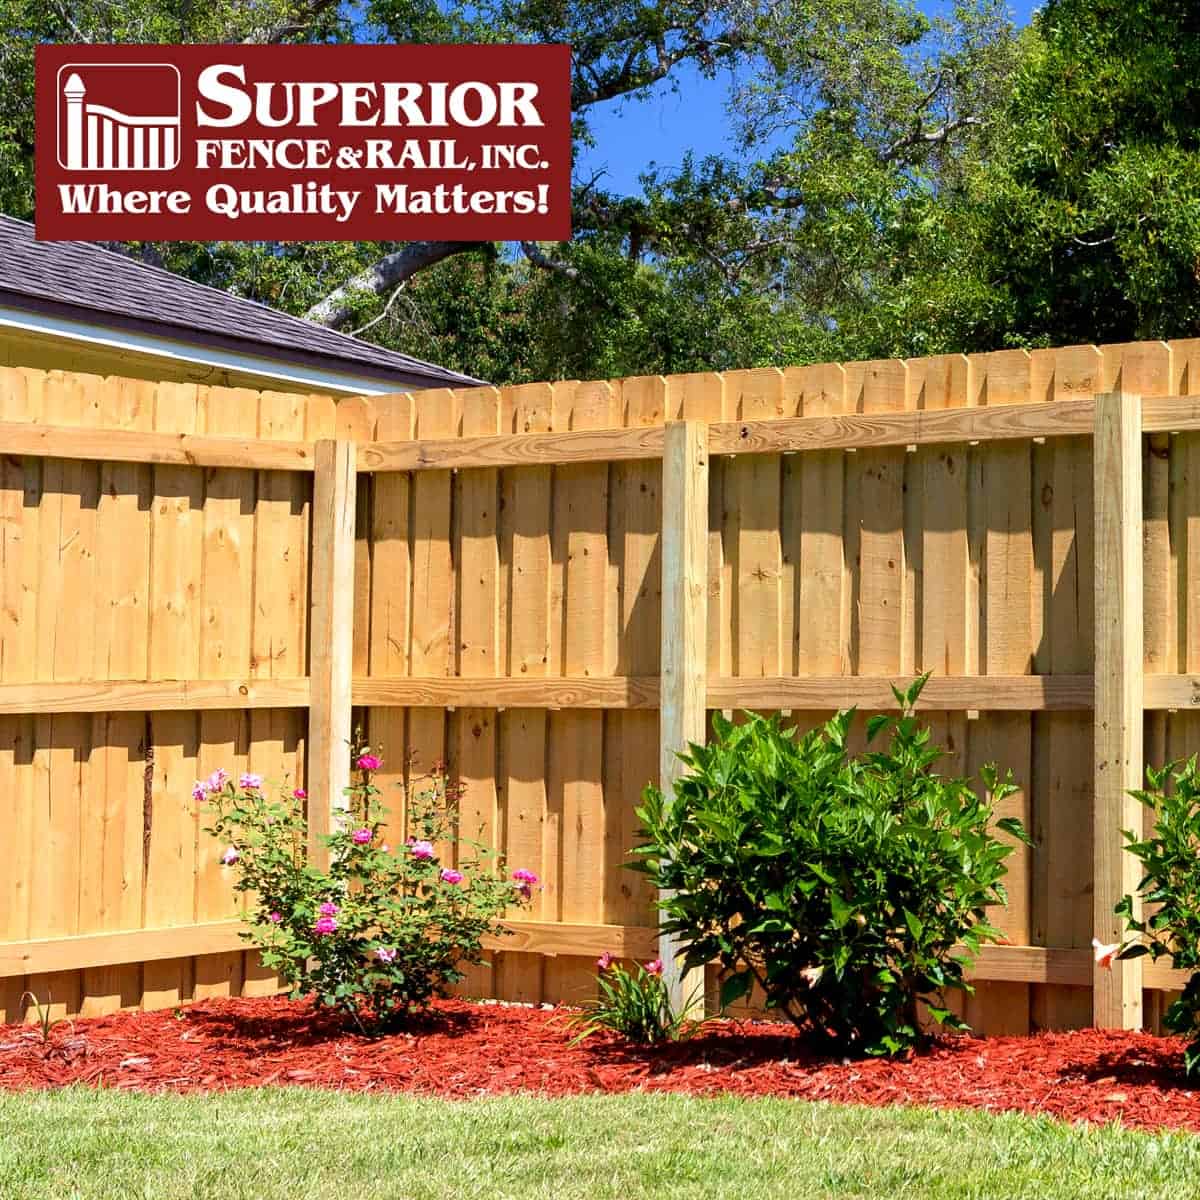 https://www.superiorfenceandrail.com/wp-content/uploads/2022/11/Sugar-Land-Fence-Company-Contractor.jpg